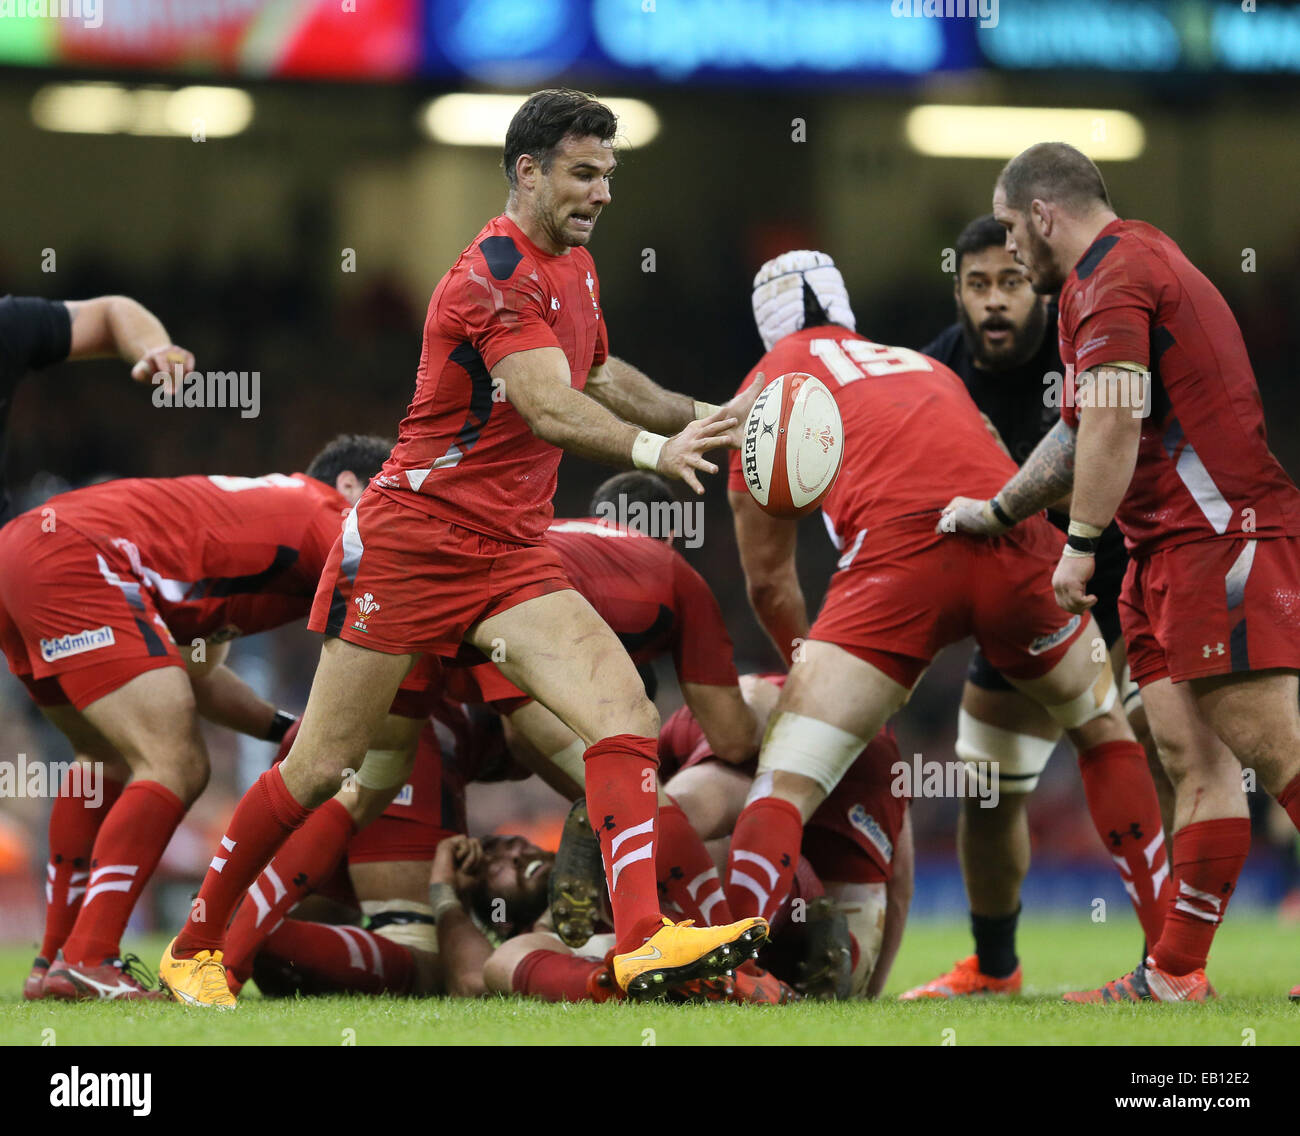 Cardiff, UK. 22nd Nov, 2014. Mike Phillips of Wales - Autumn Test Series - Wales vs New Zealand - Millennium Stadium - Cardiff - Wales - 22nd November 2014 - Picture Simon Bellis/Sportimage. © csm/Alamy Live News Stock Photo